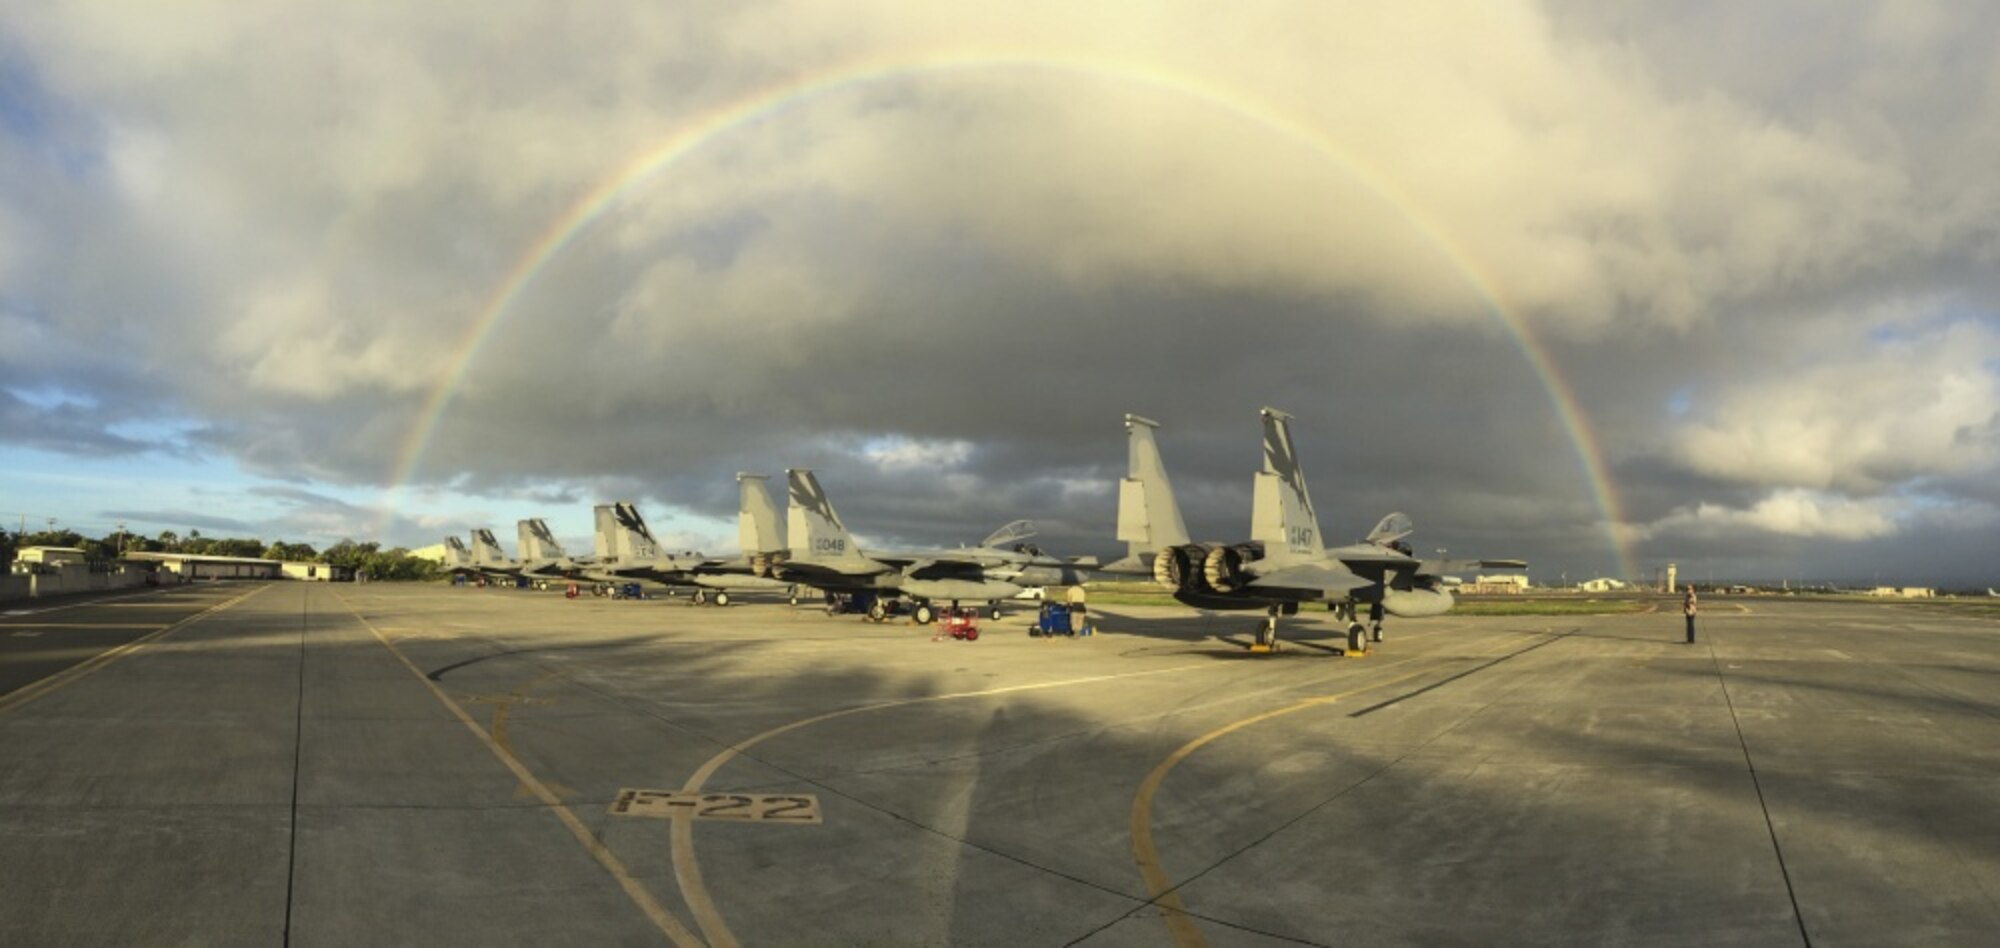 Exercise Sentry Aloha 18-1 held at Joint Base Pearl Harbor-Hickam, Hawaii, ended Jan 24. 2018.
The exercise which takes place several times a year is hosted by the Hawaii Air National Guard which is the Air Force’s largest ANG wing.